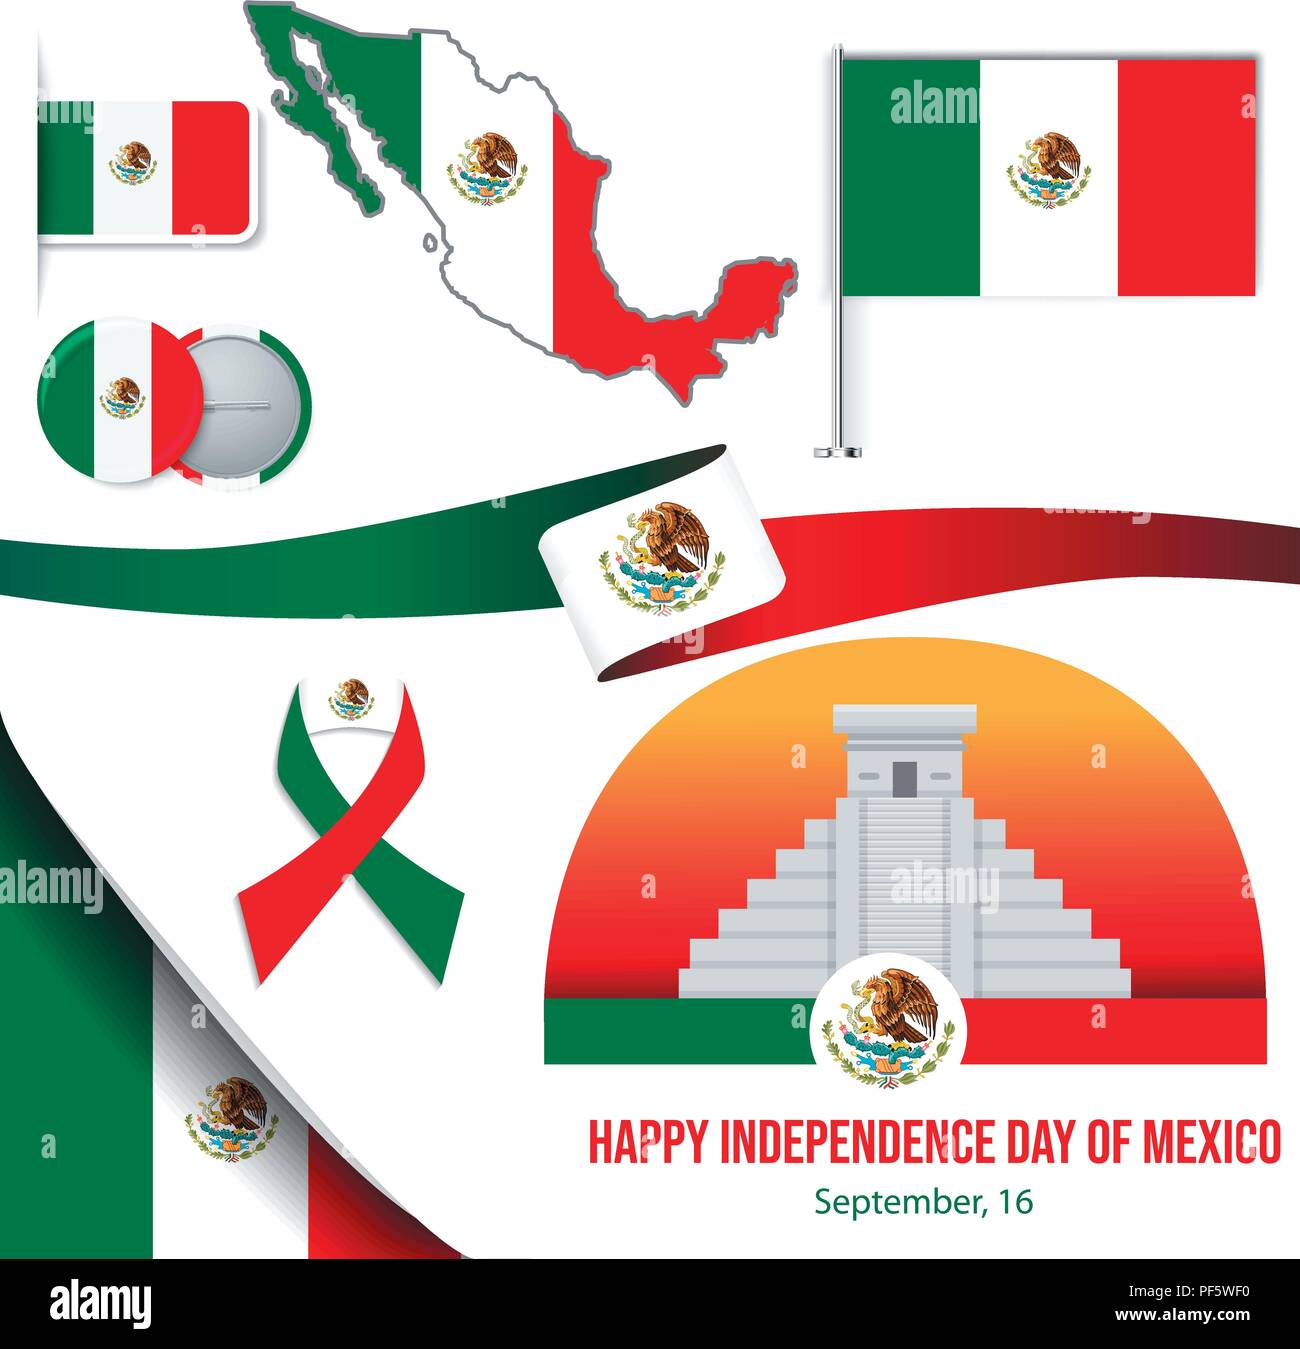 Hand Drawn Mexican Independence Day Vector Circle Shape Tags.Green, White and Red Mexican Flag. Black Hand Written Letteres.Red Heart. Mexican Independence Day Illustration Set. Stock Vector